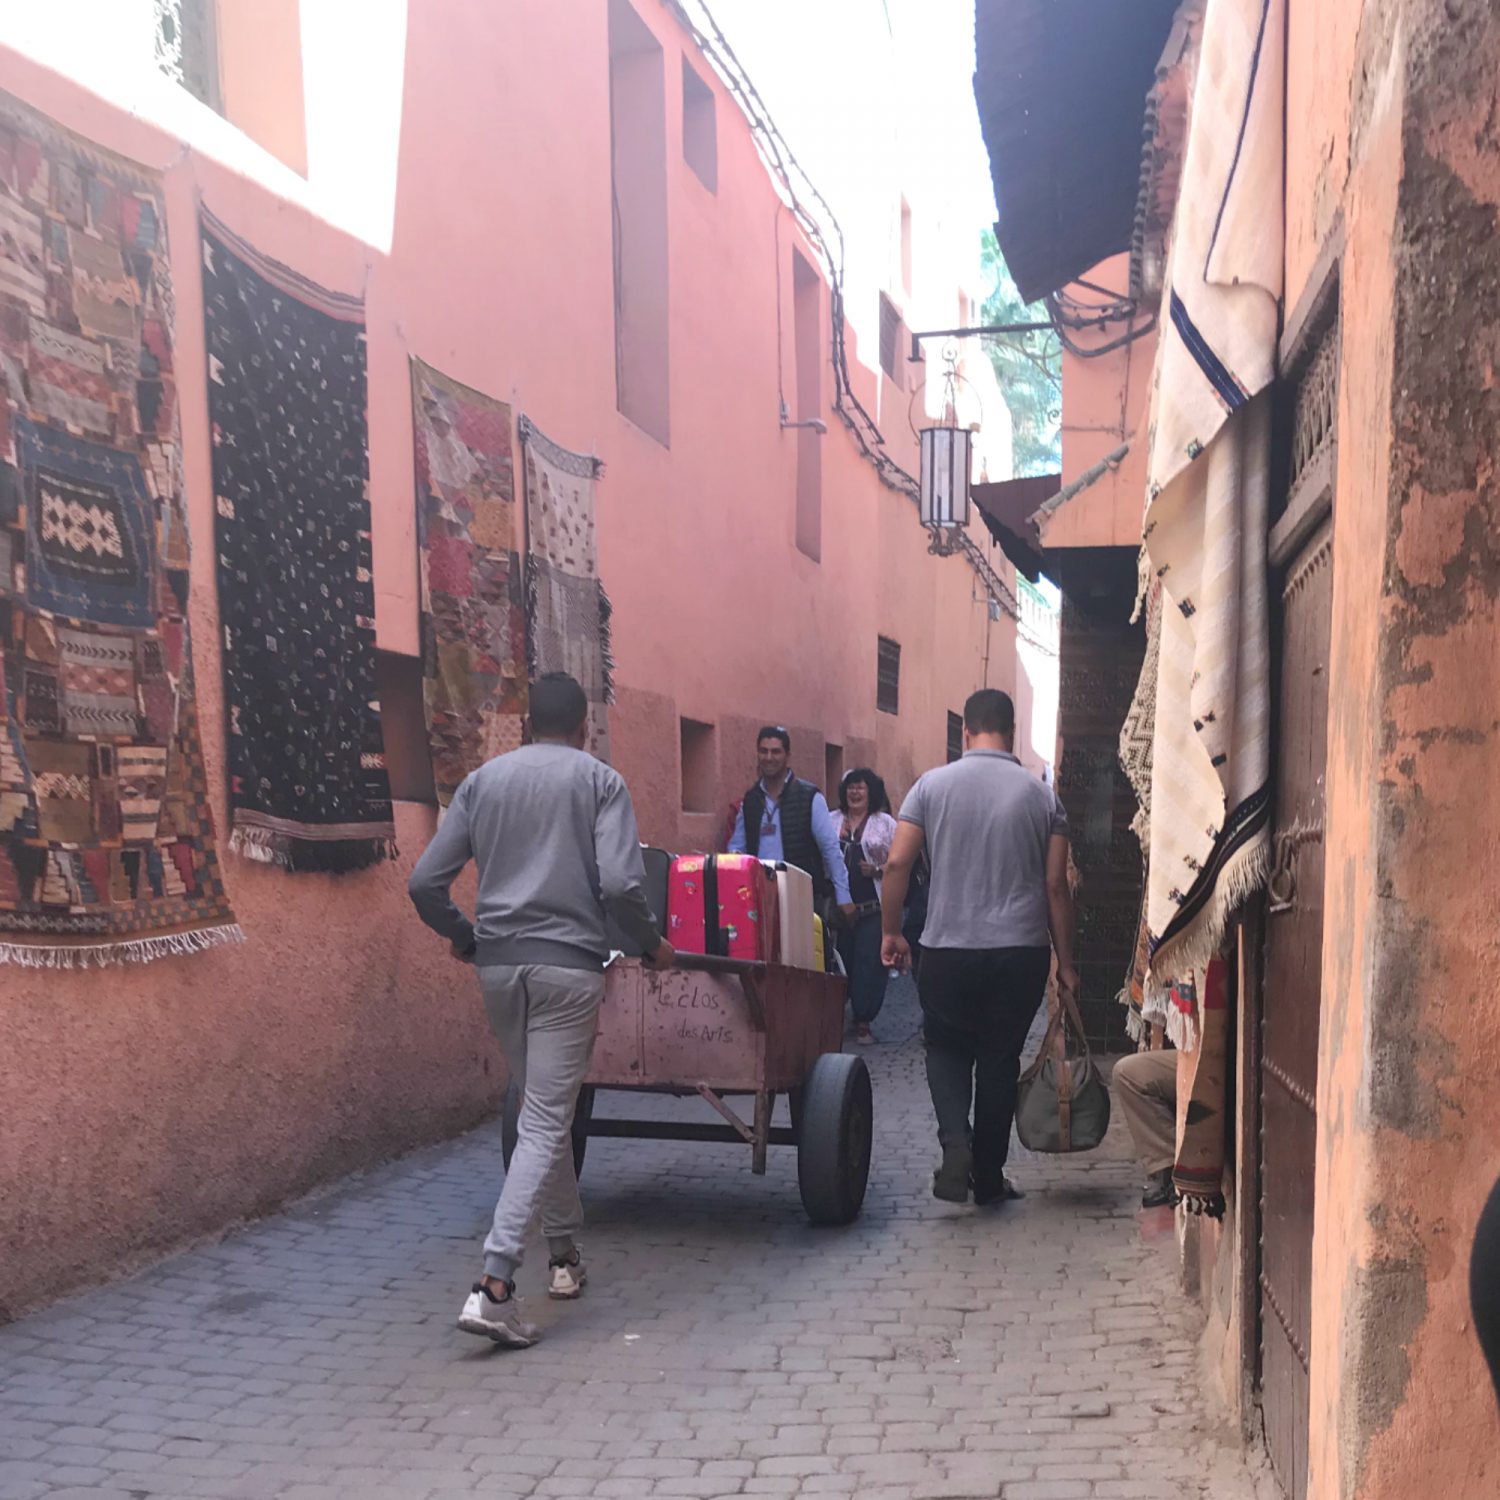 My Journey In Morocco | Marrakech Part I